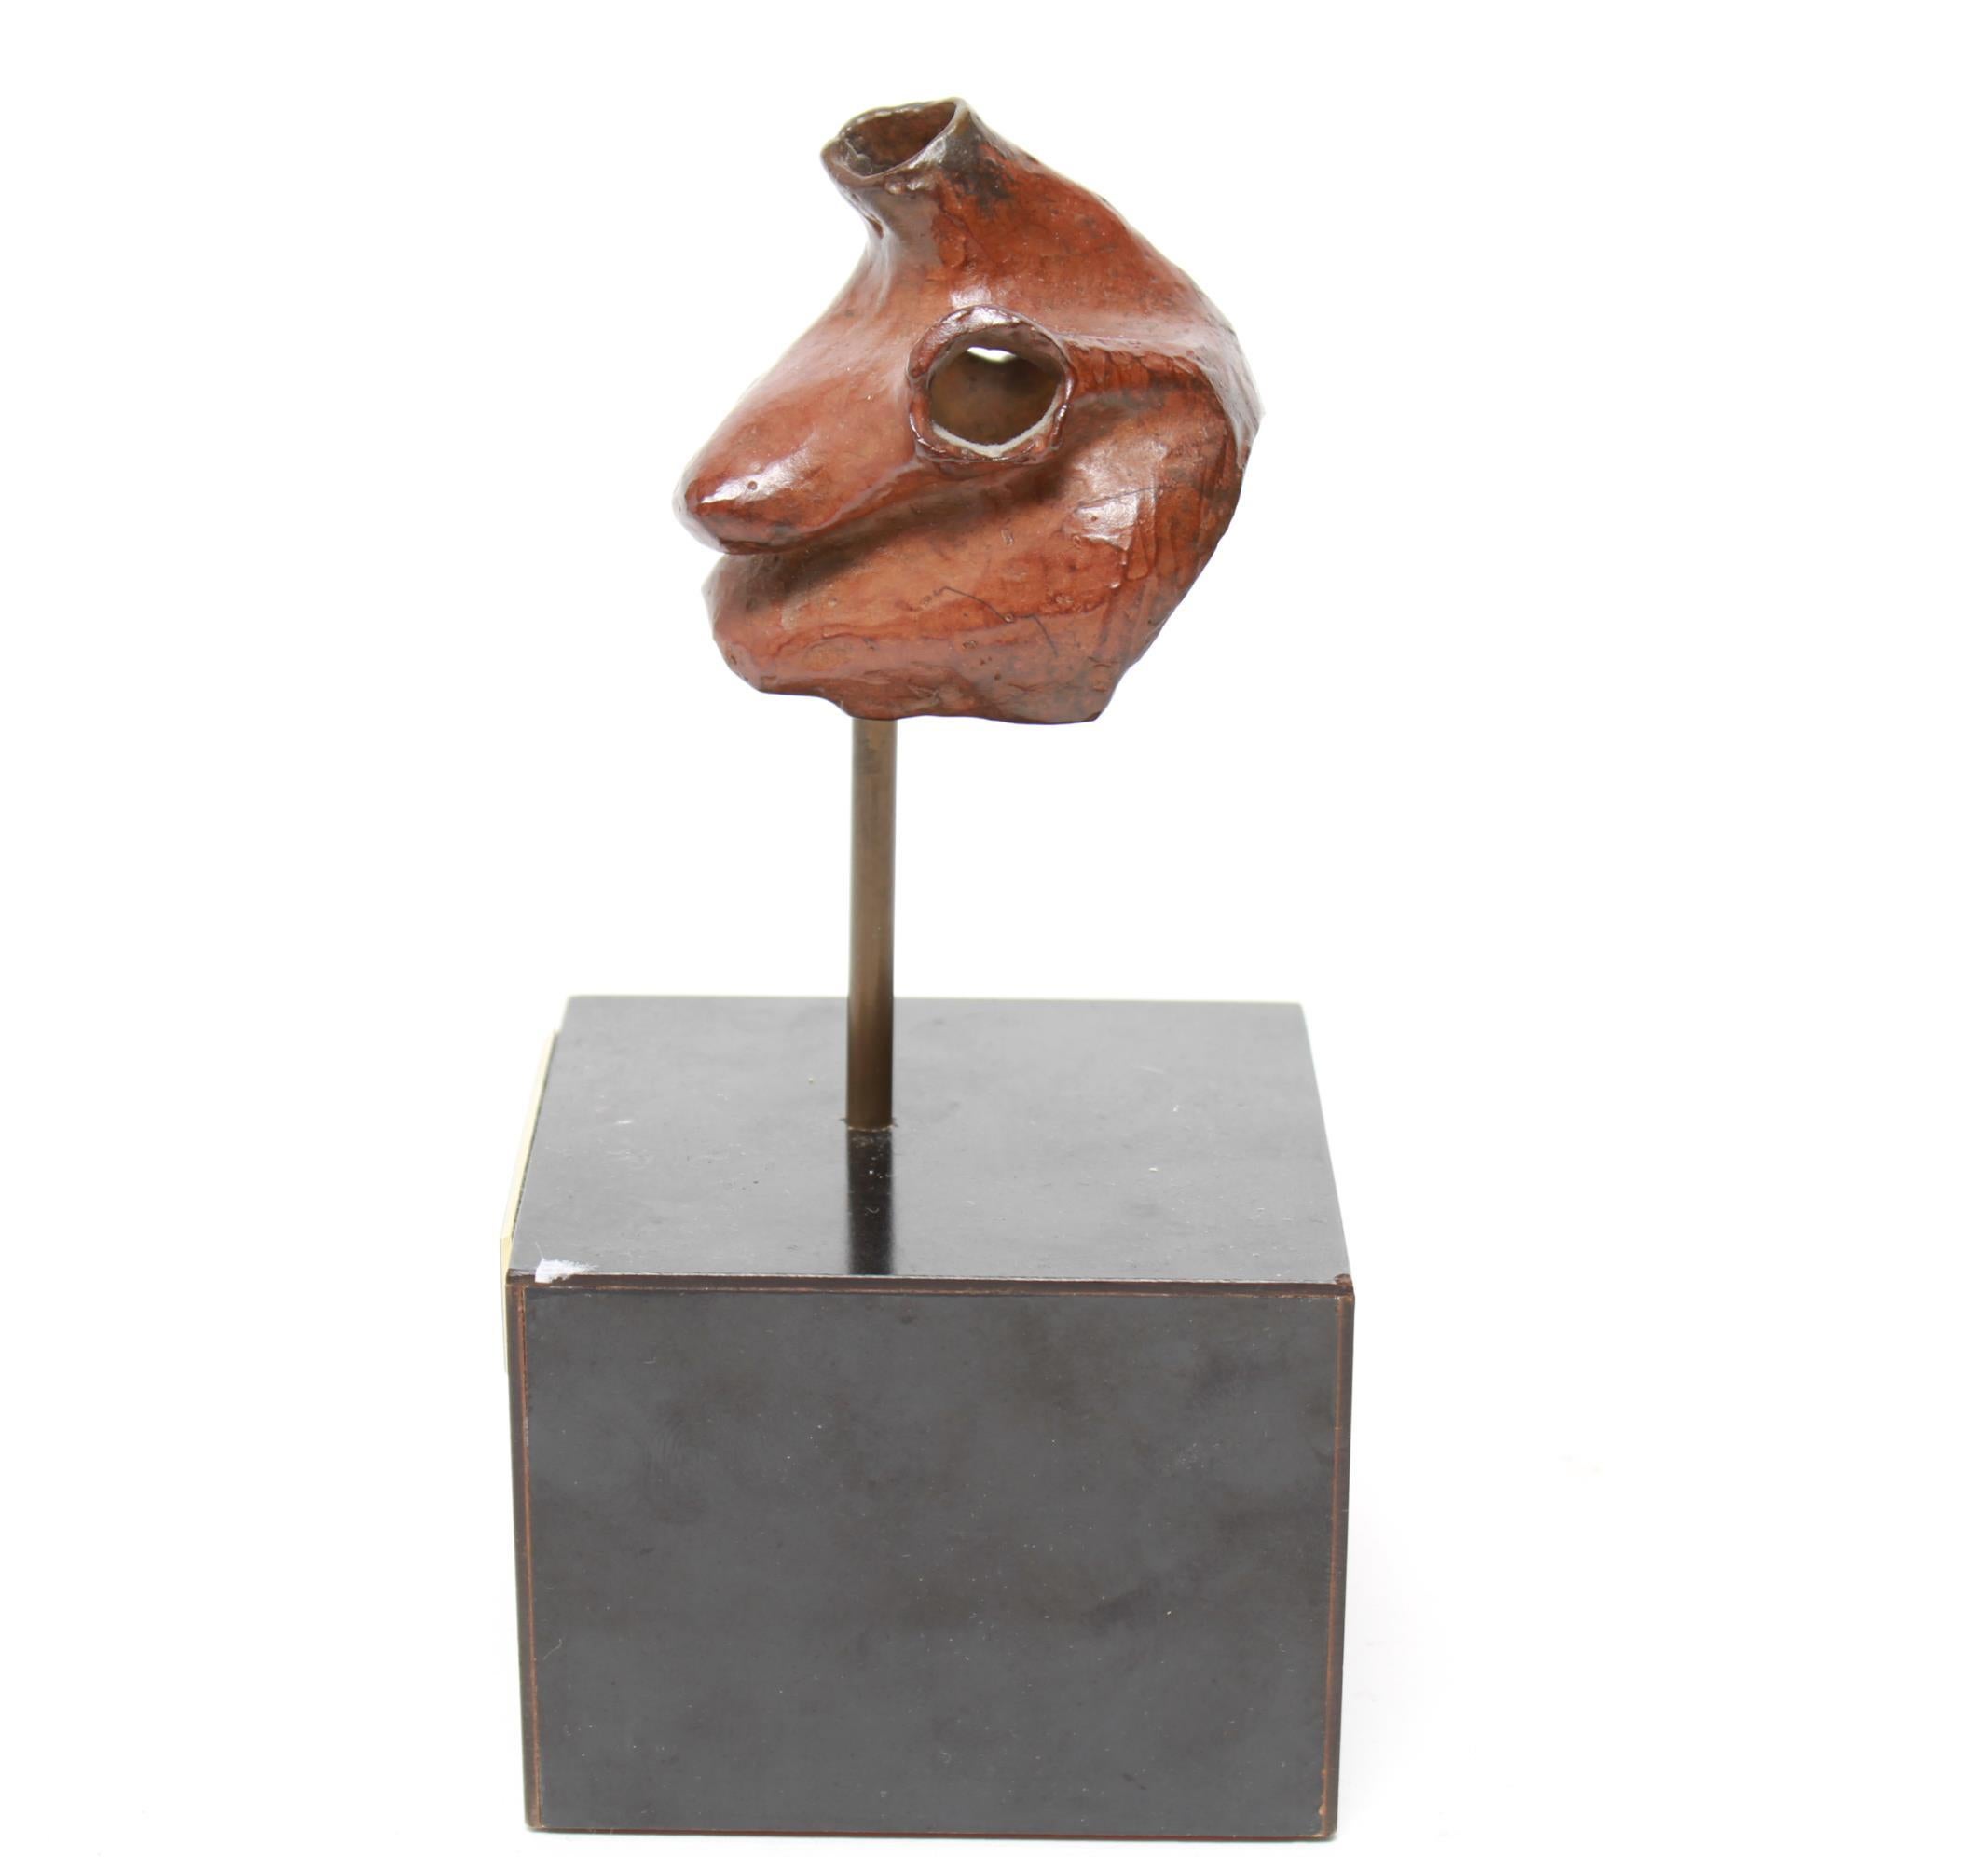 Modern bronze sculpture titled 'Bust of Esti' created by Canadian-Israeli artist Eli Ilan (1928-1982) in 1971. The piece depicts the upper part of a female torso and is signed on the base of the bronze with illegible edition number. Titled and dated